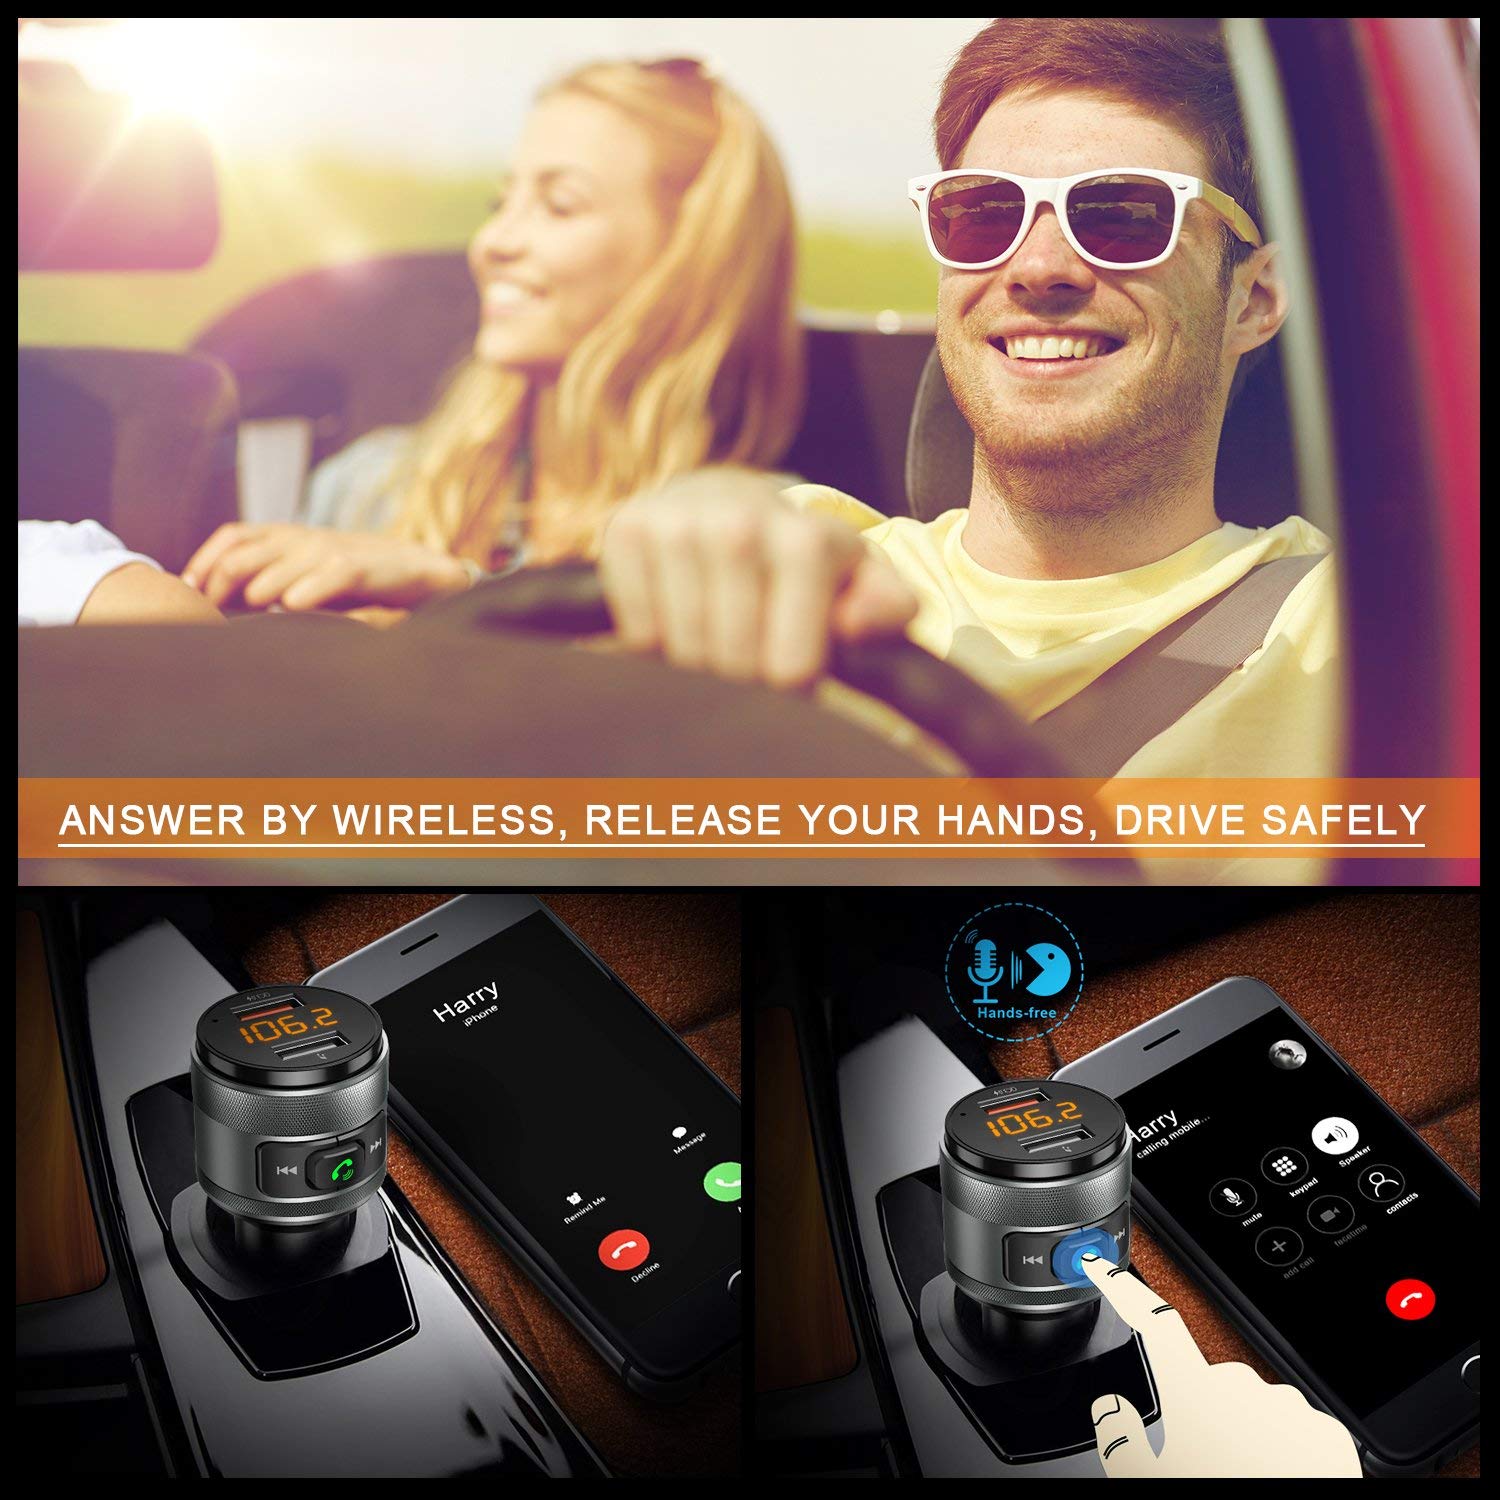 No Car Stereo Bluetooth or Aux? Try the Imden Wireless Car Kit